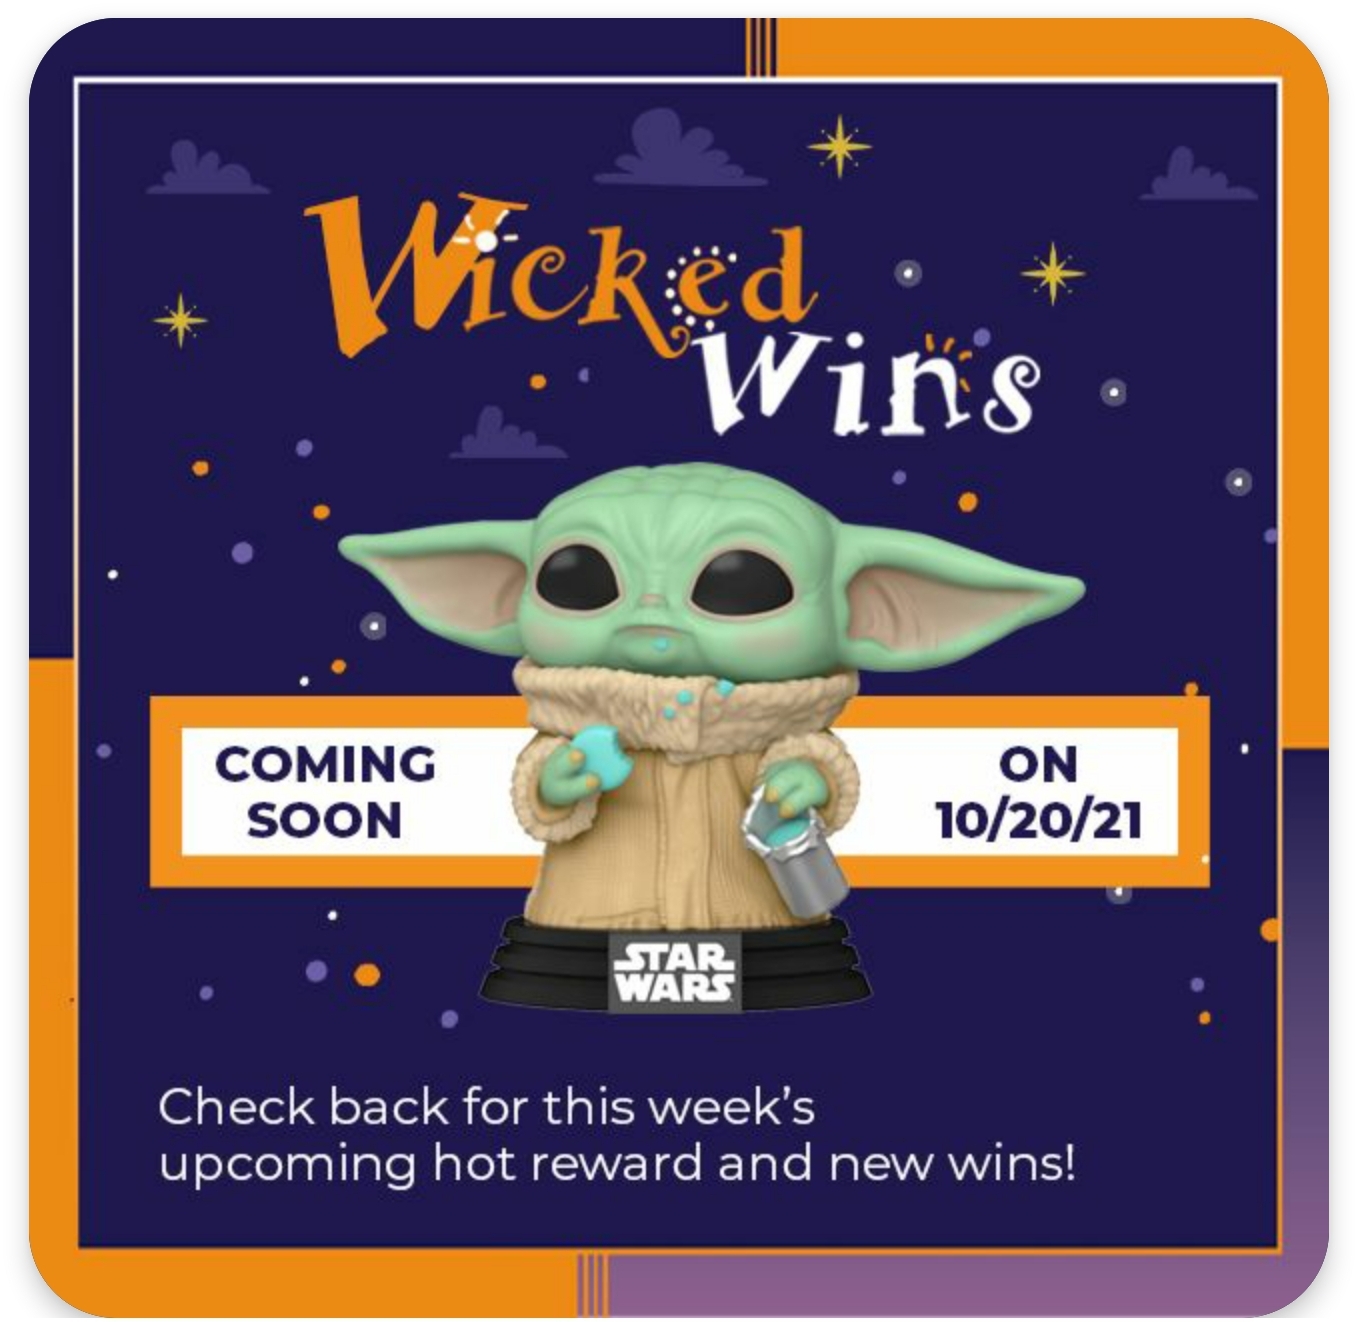 Disney movie insiders: Starting 10/20 at 12PM ET They are offering a Star wars Baby Yoda (Grogu) Funko figure - points unknown